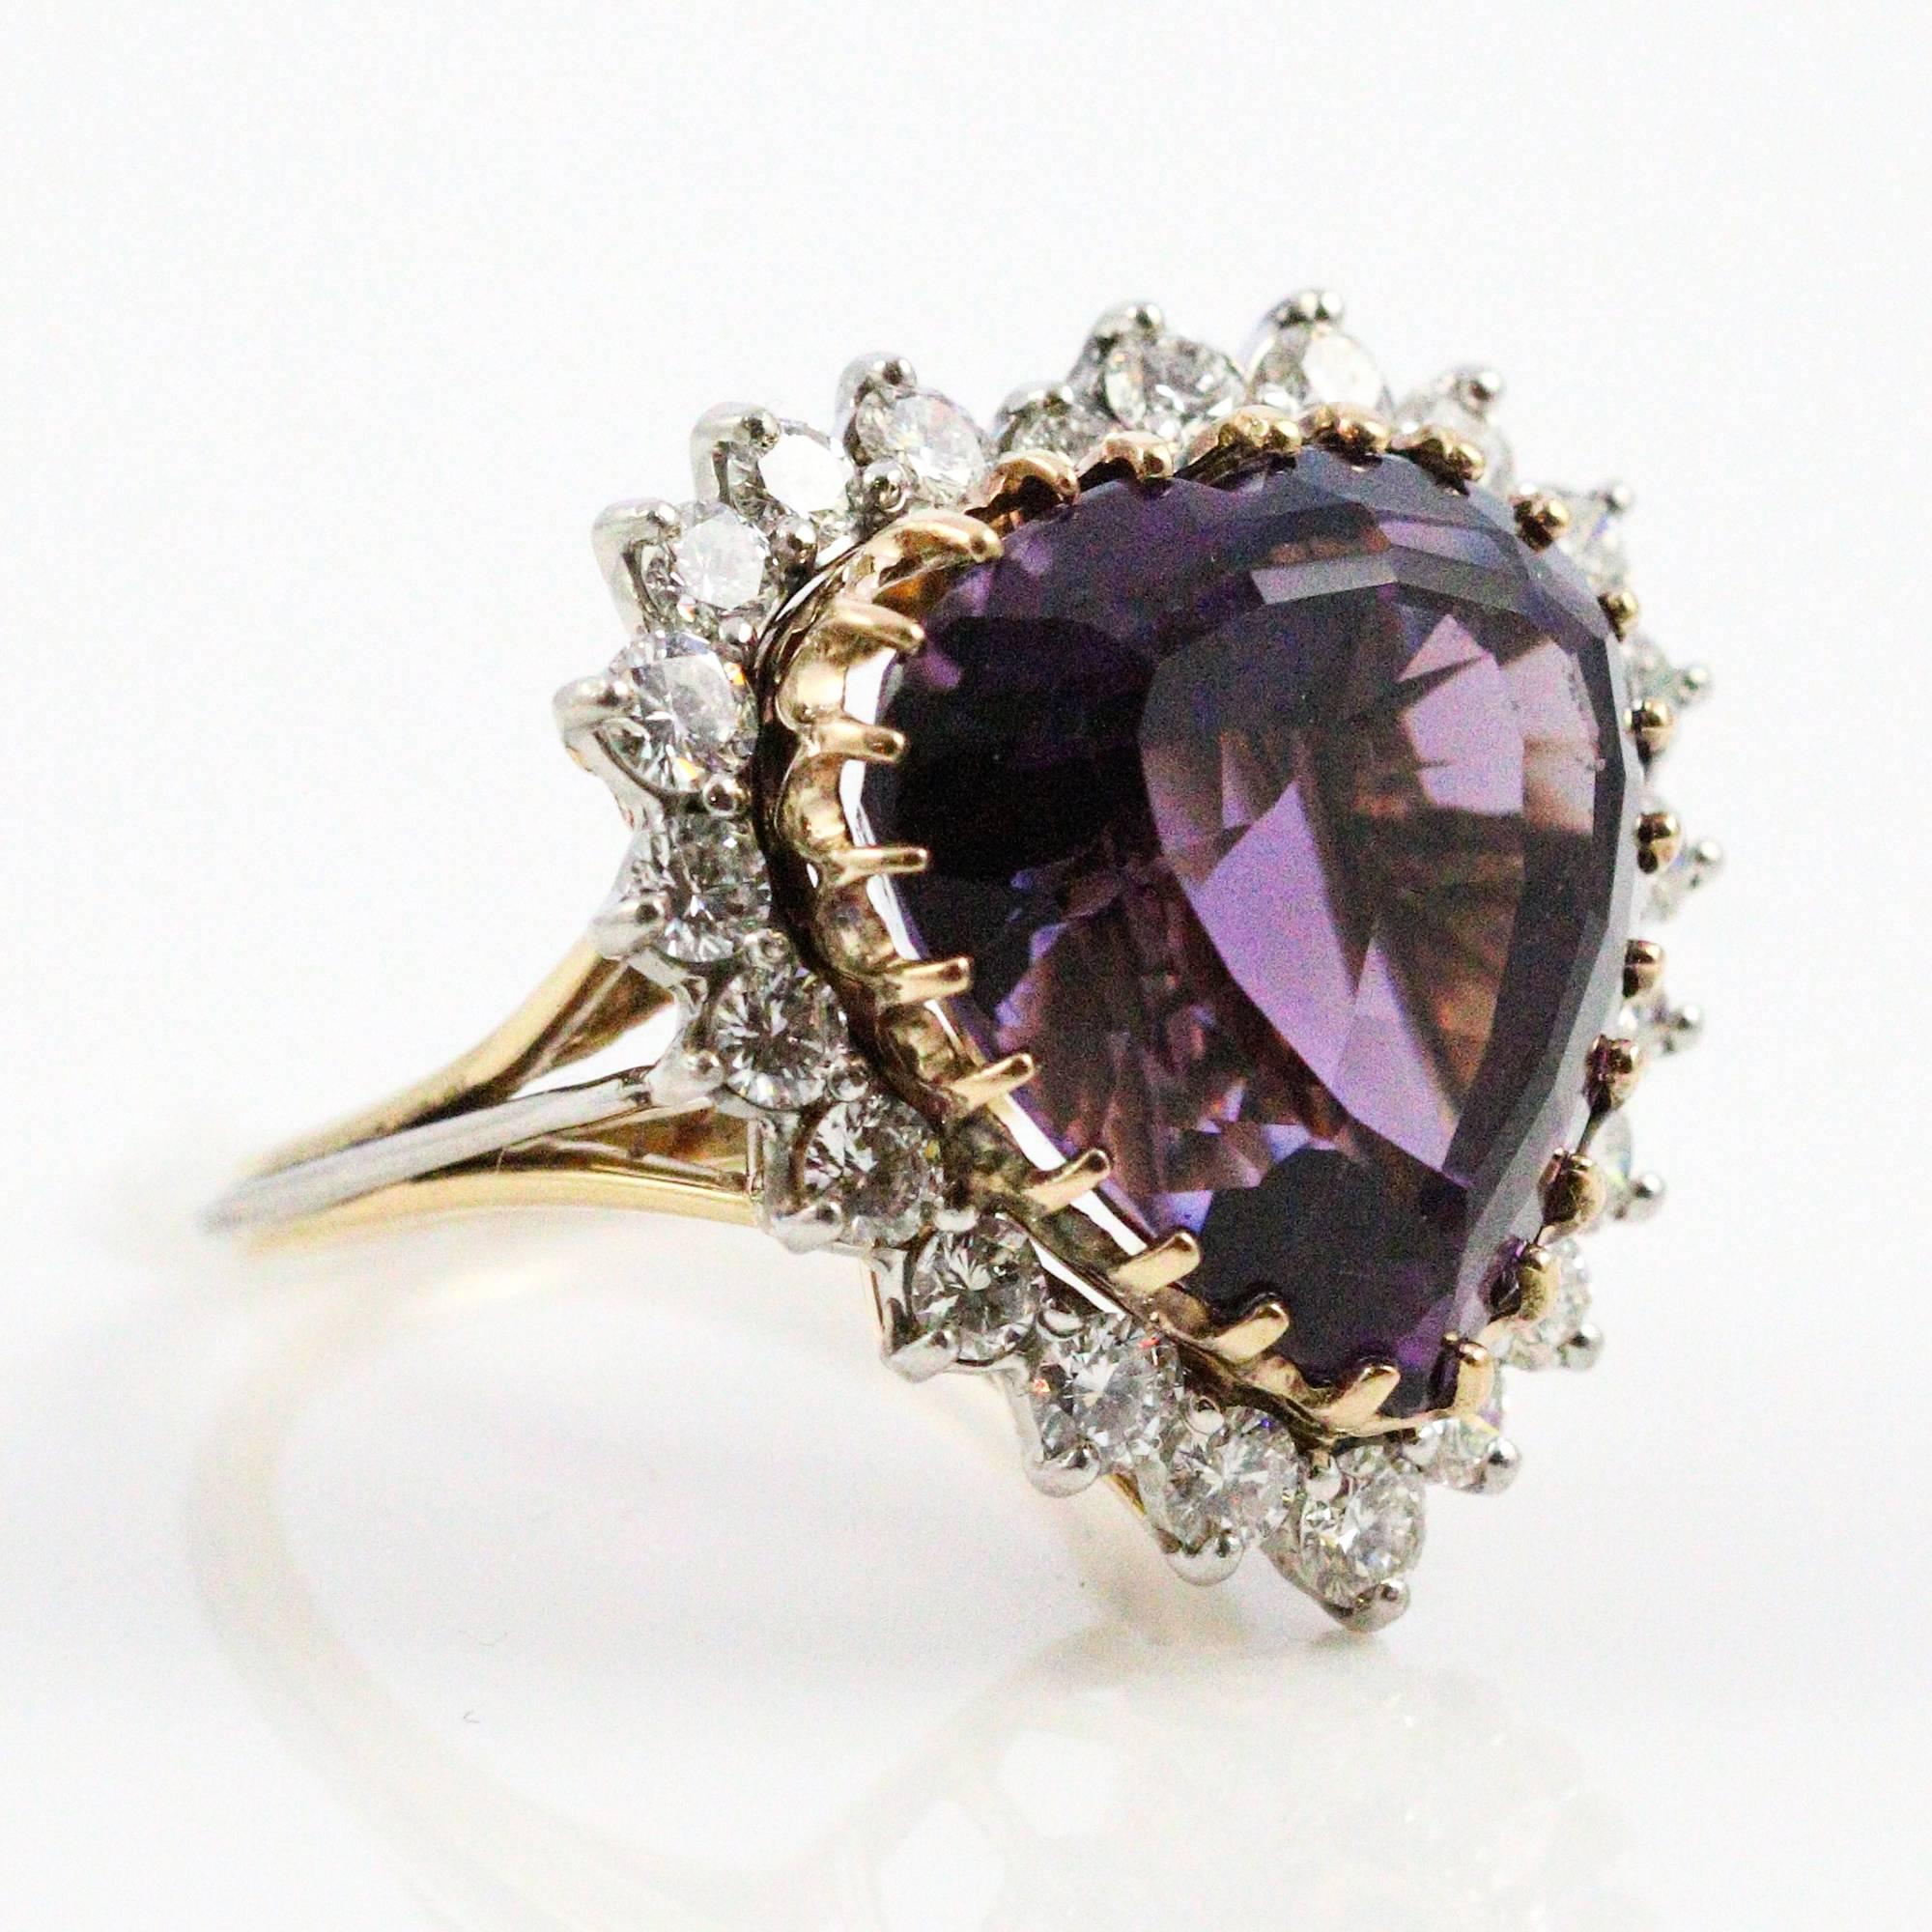 Women's 1950s Retro 12 Carat Approximate Heart Shaped Amethyst and Diamond Ring